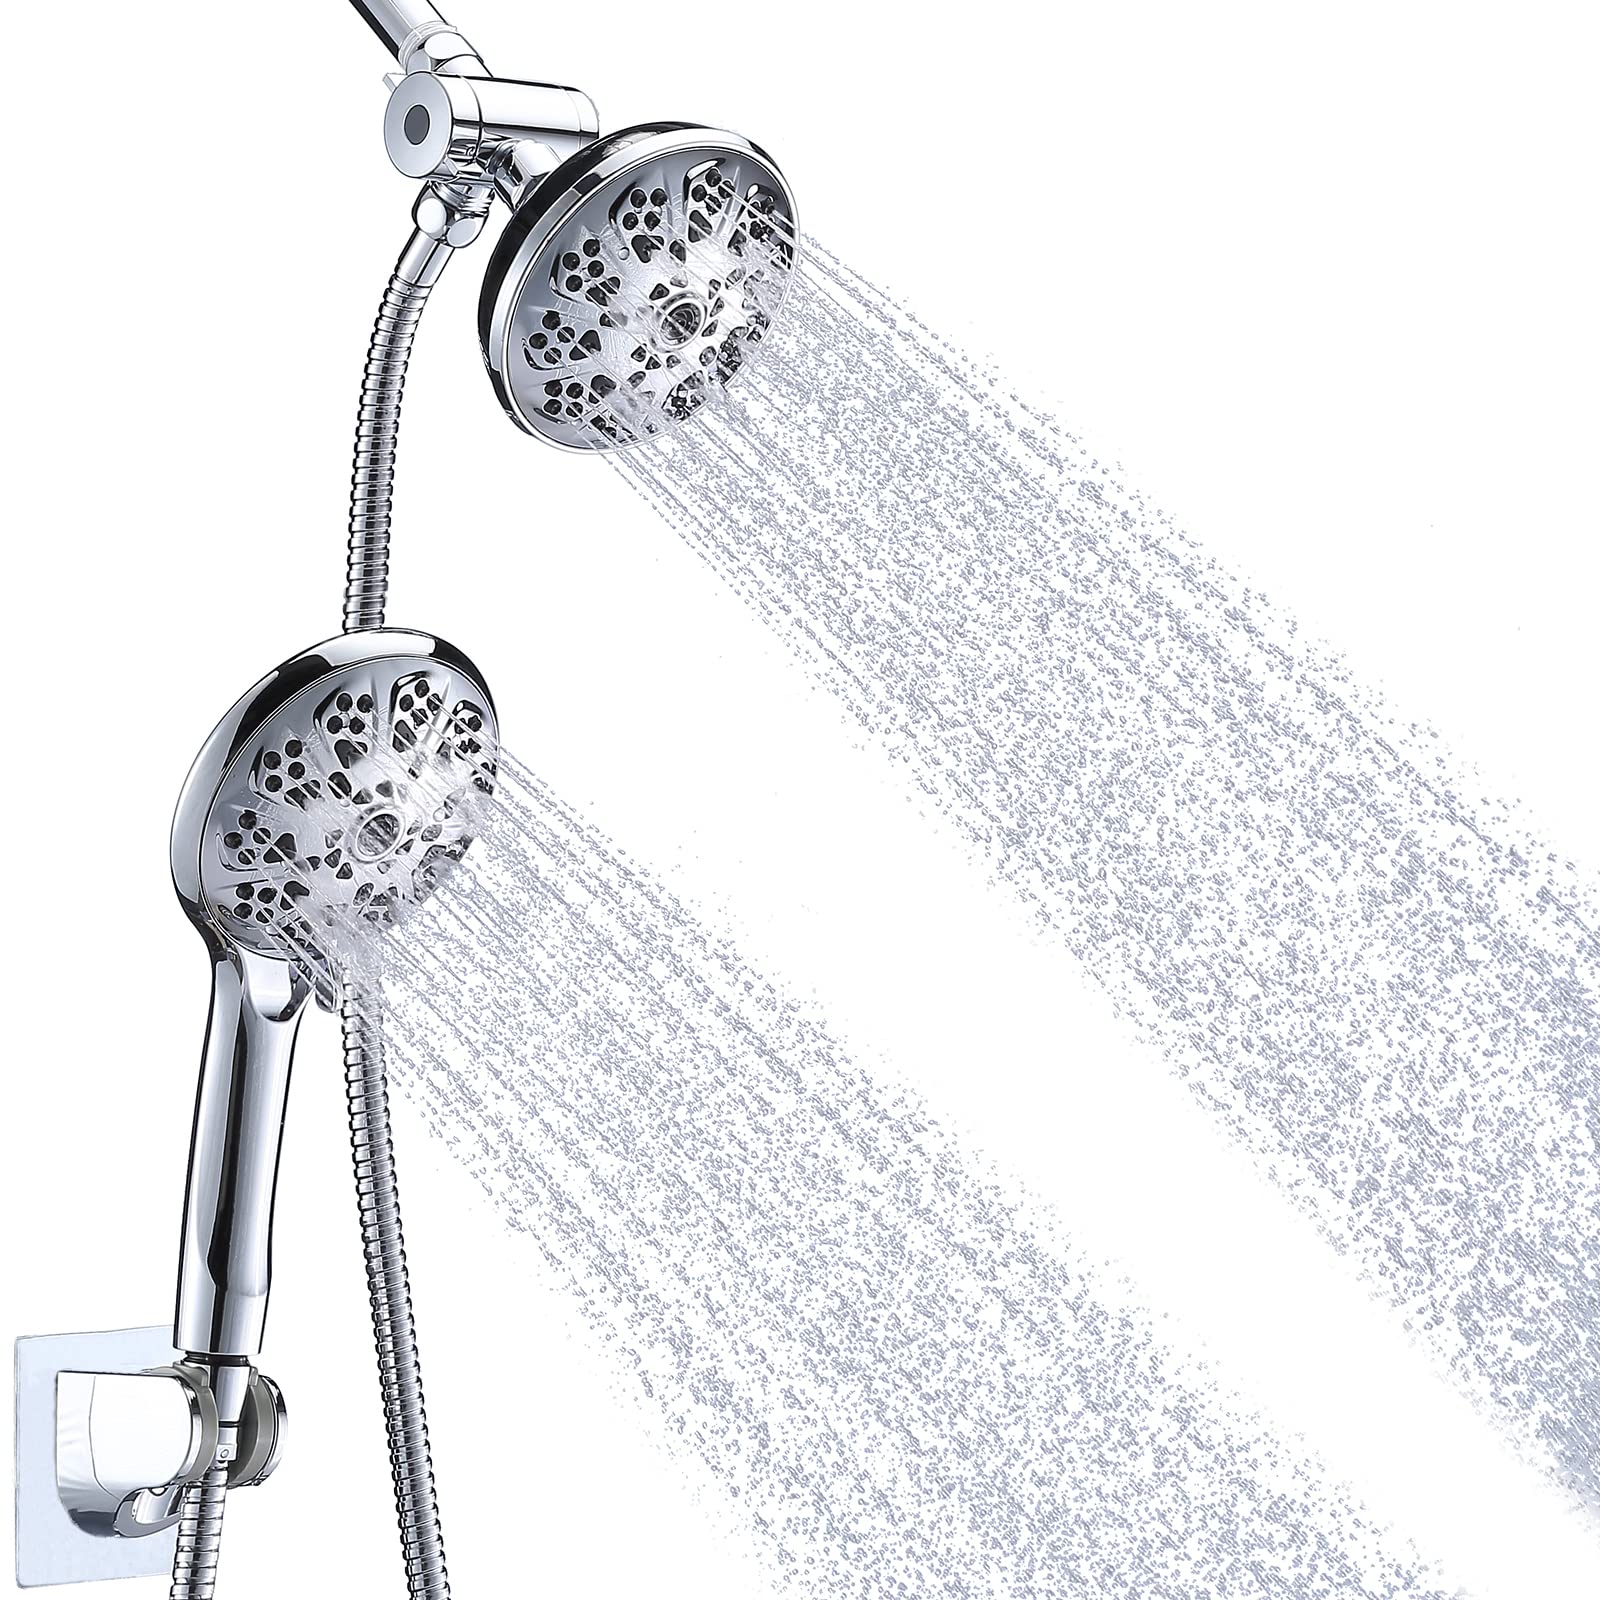 Briout Dual Shower Head 10 Settings - High Pressure Shower Head with Handheld Combo Set - Enjoy Powerful Double Showerhead Spray Separately or Together, Chrome